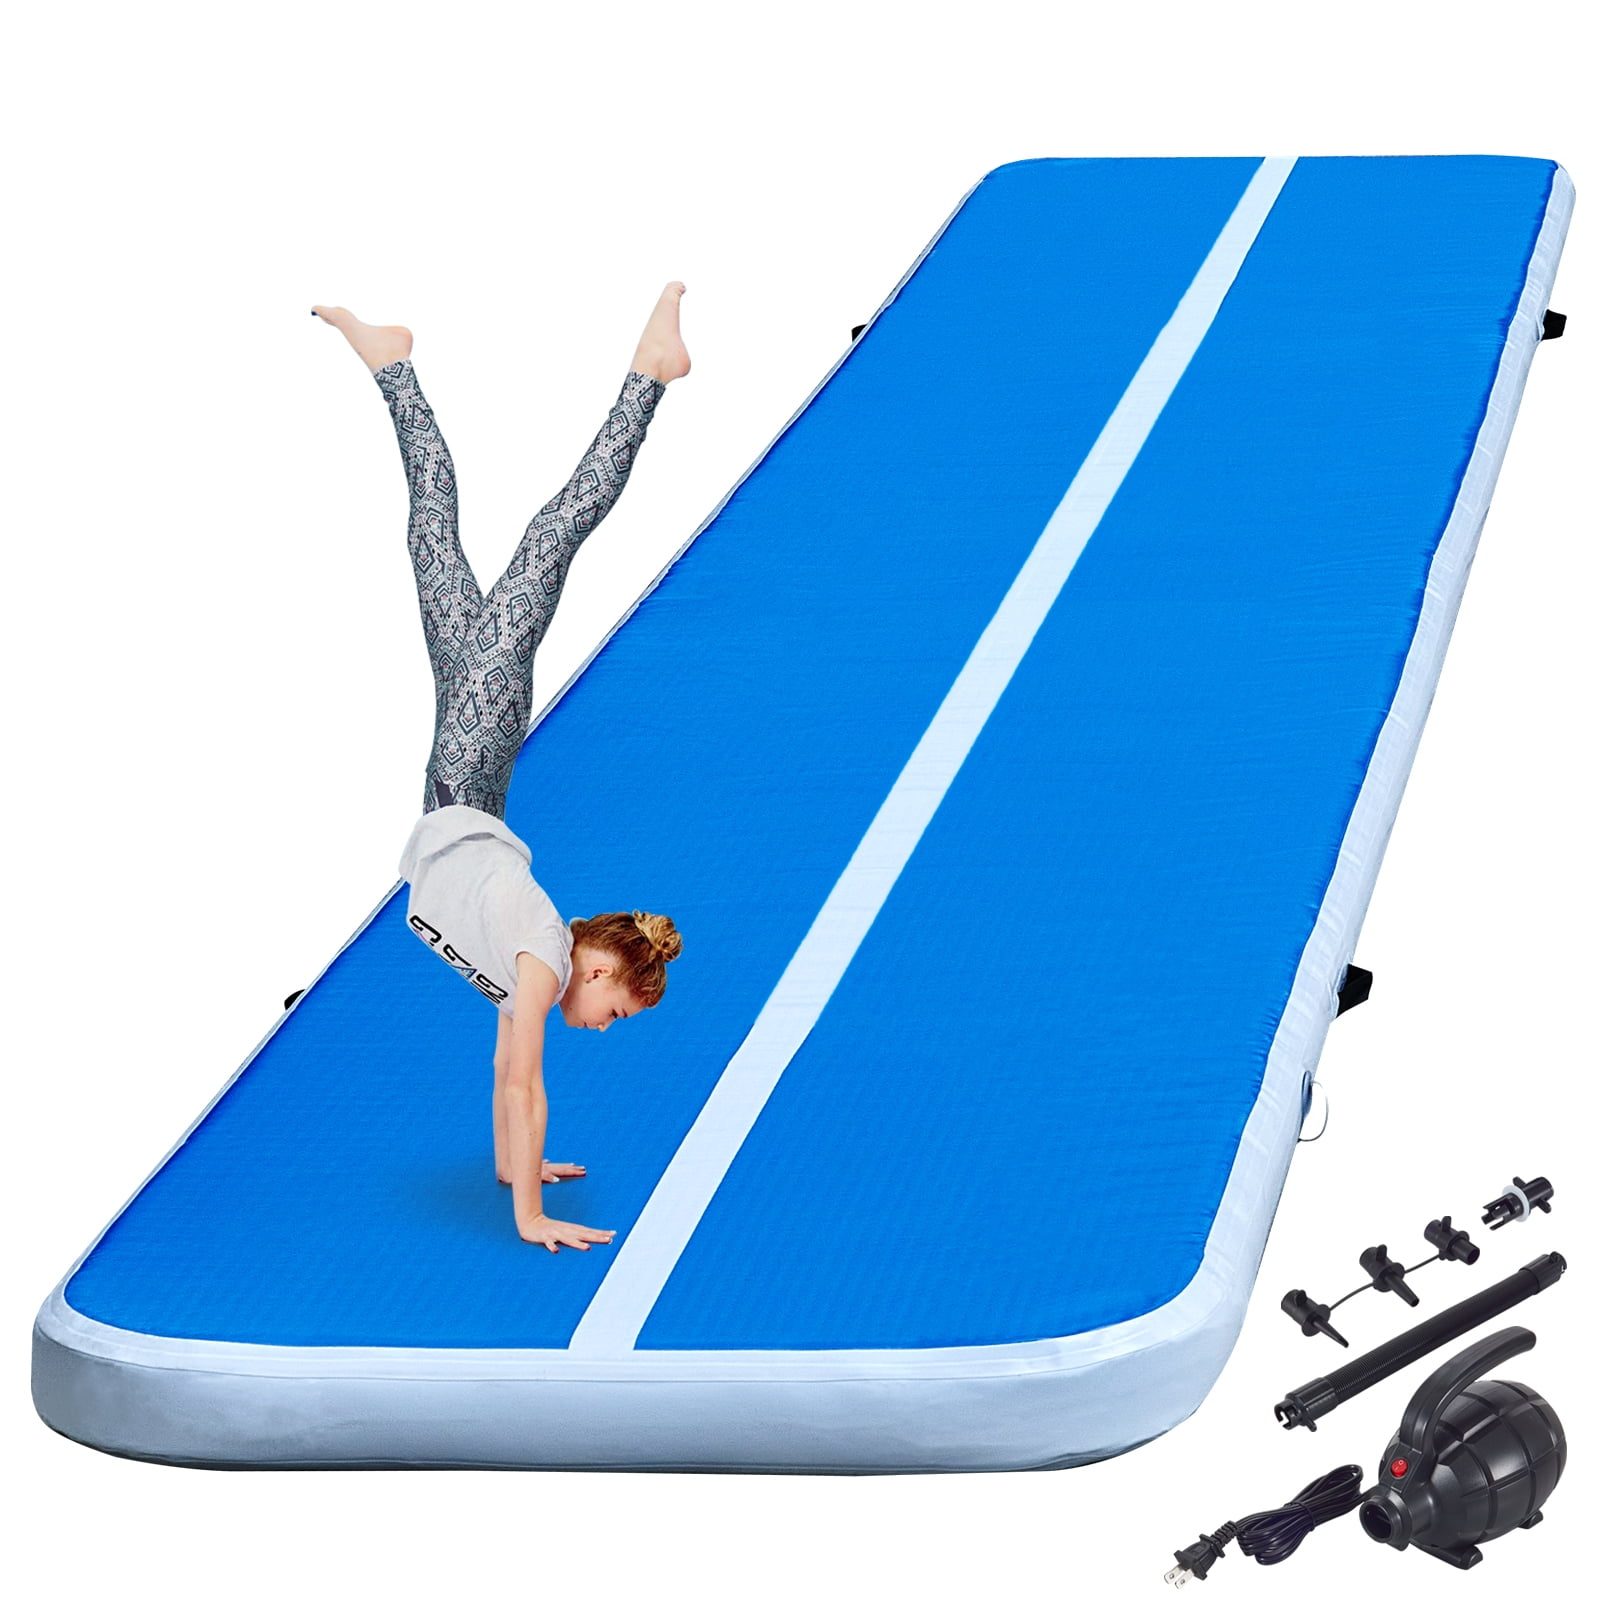 Air Track 13Ft Airtrack Inflatable Tumbling Gymnastics Mat GYM Pump US Stock 